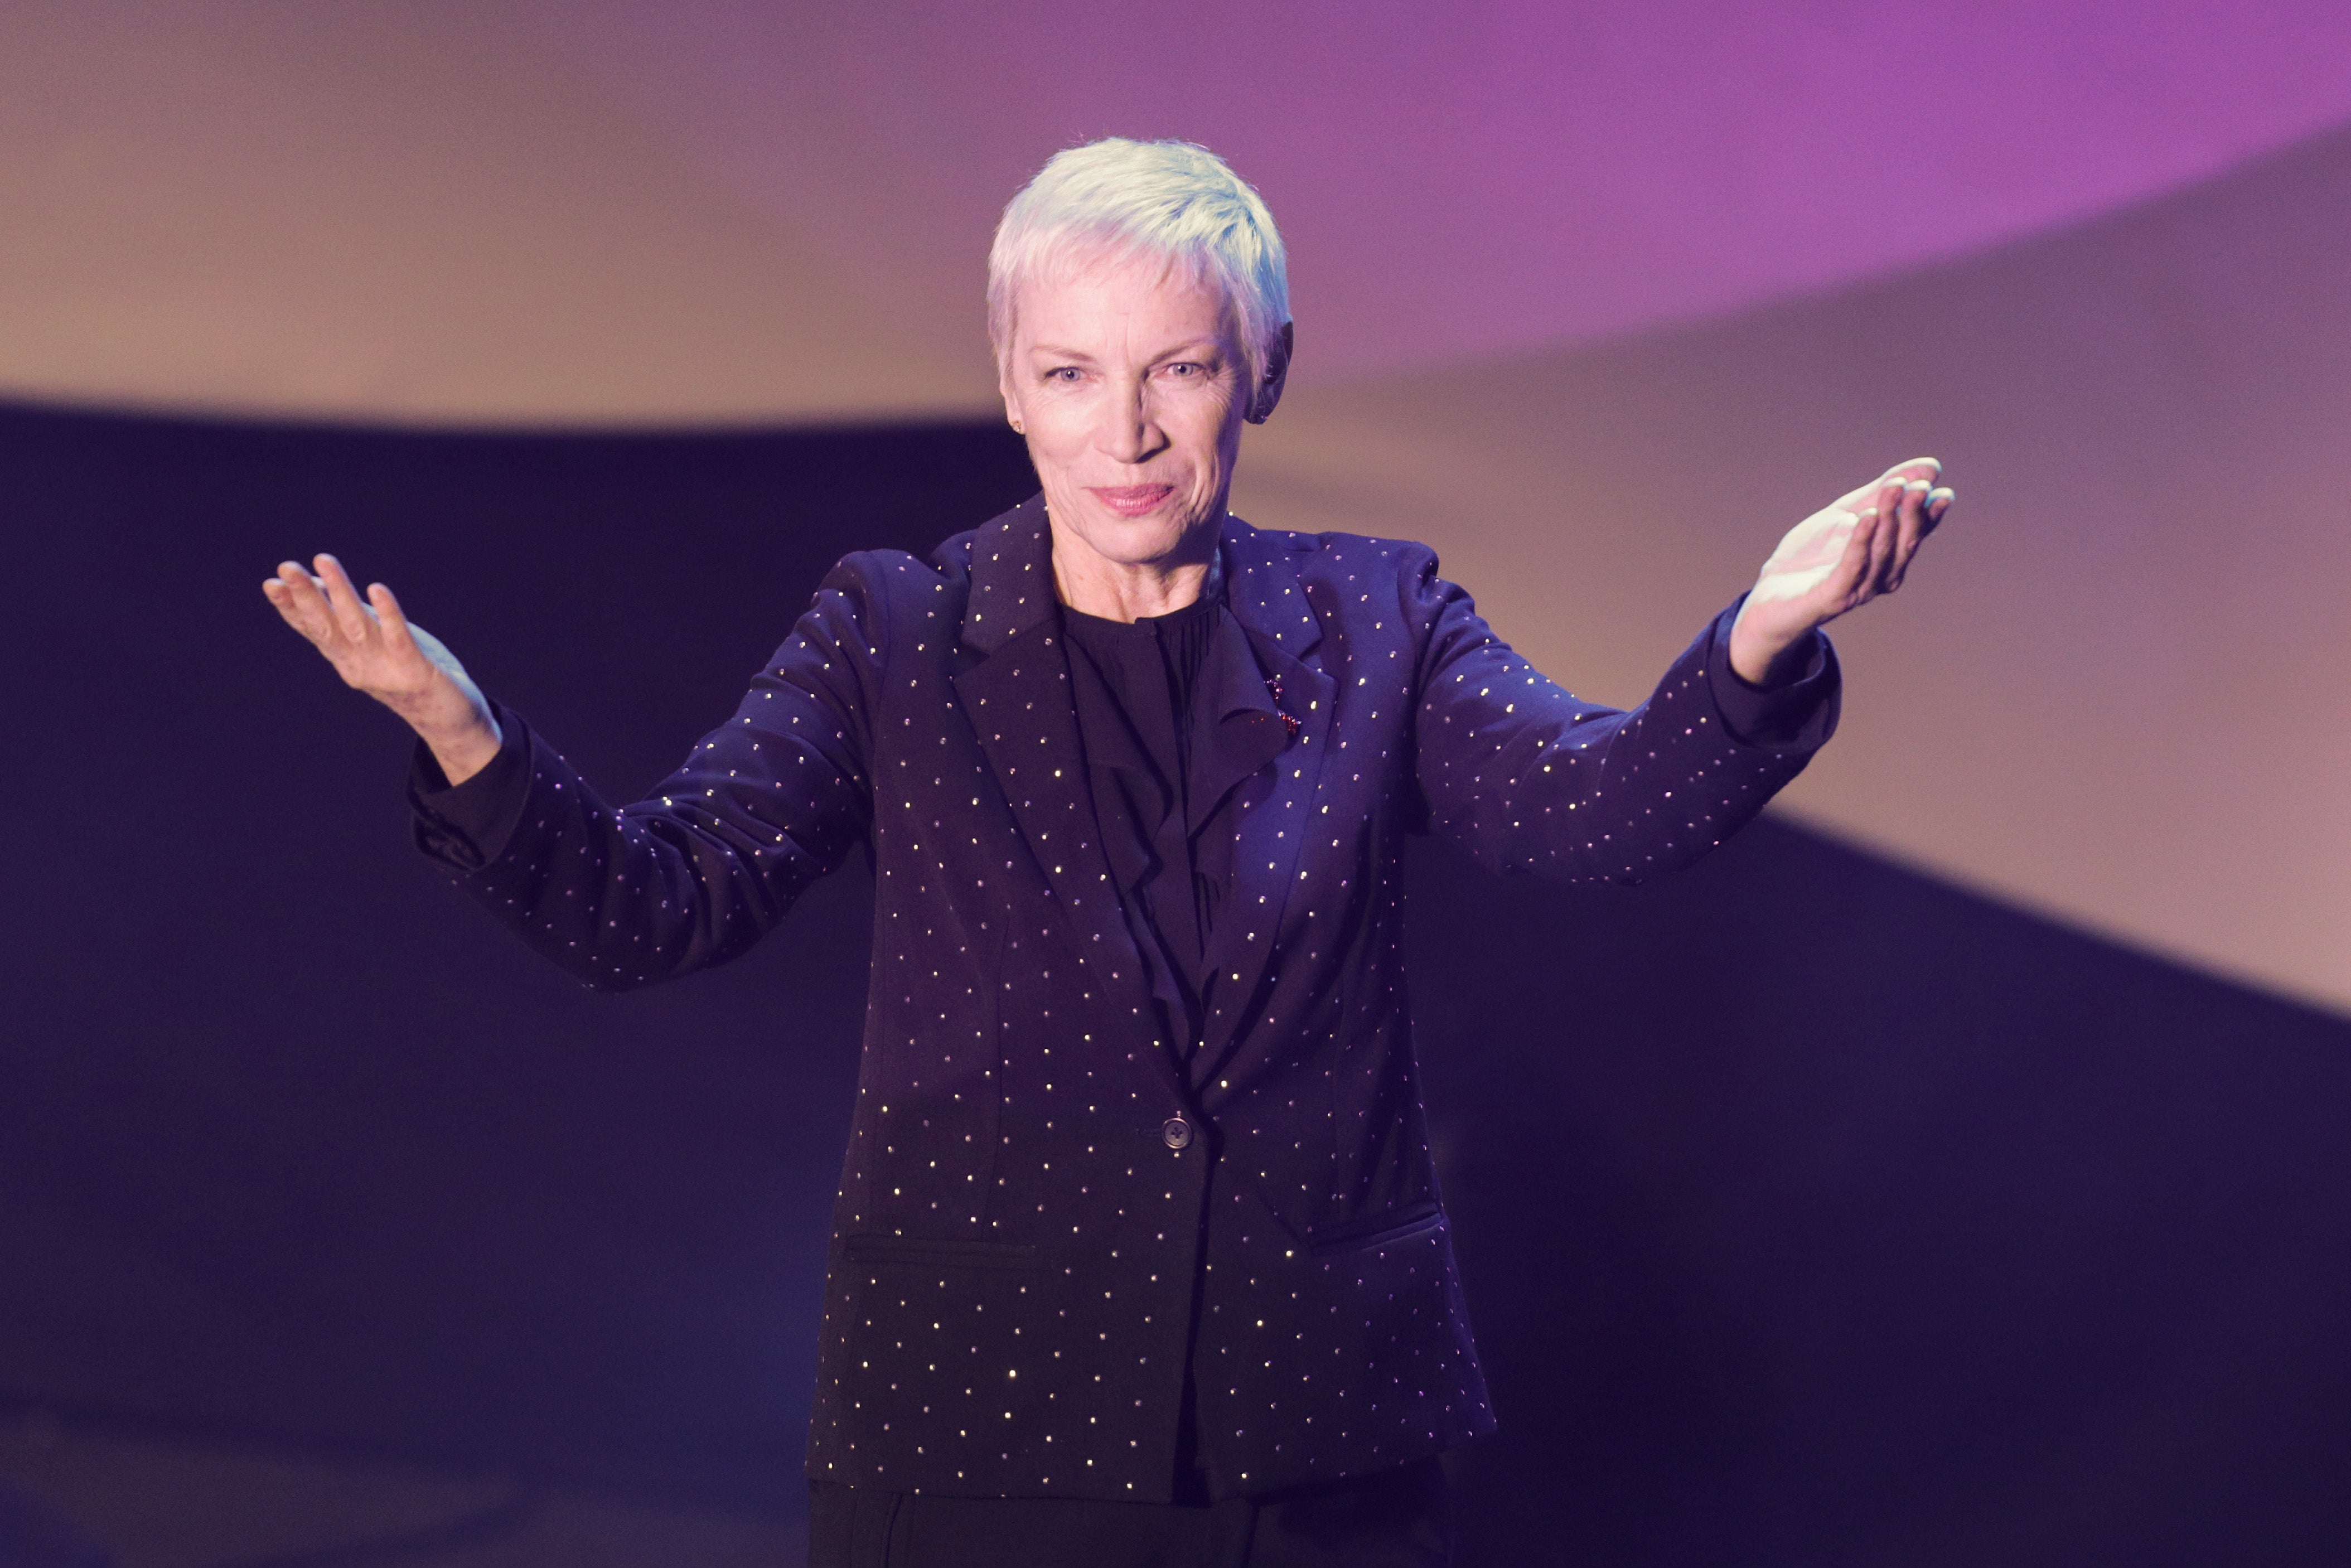 Annie Lennox on stage during the German Sustainability Awards in 2017